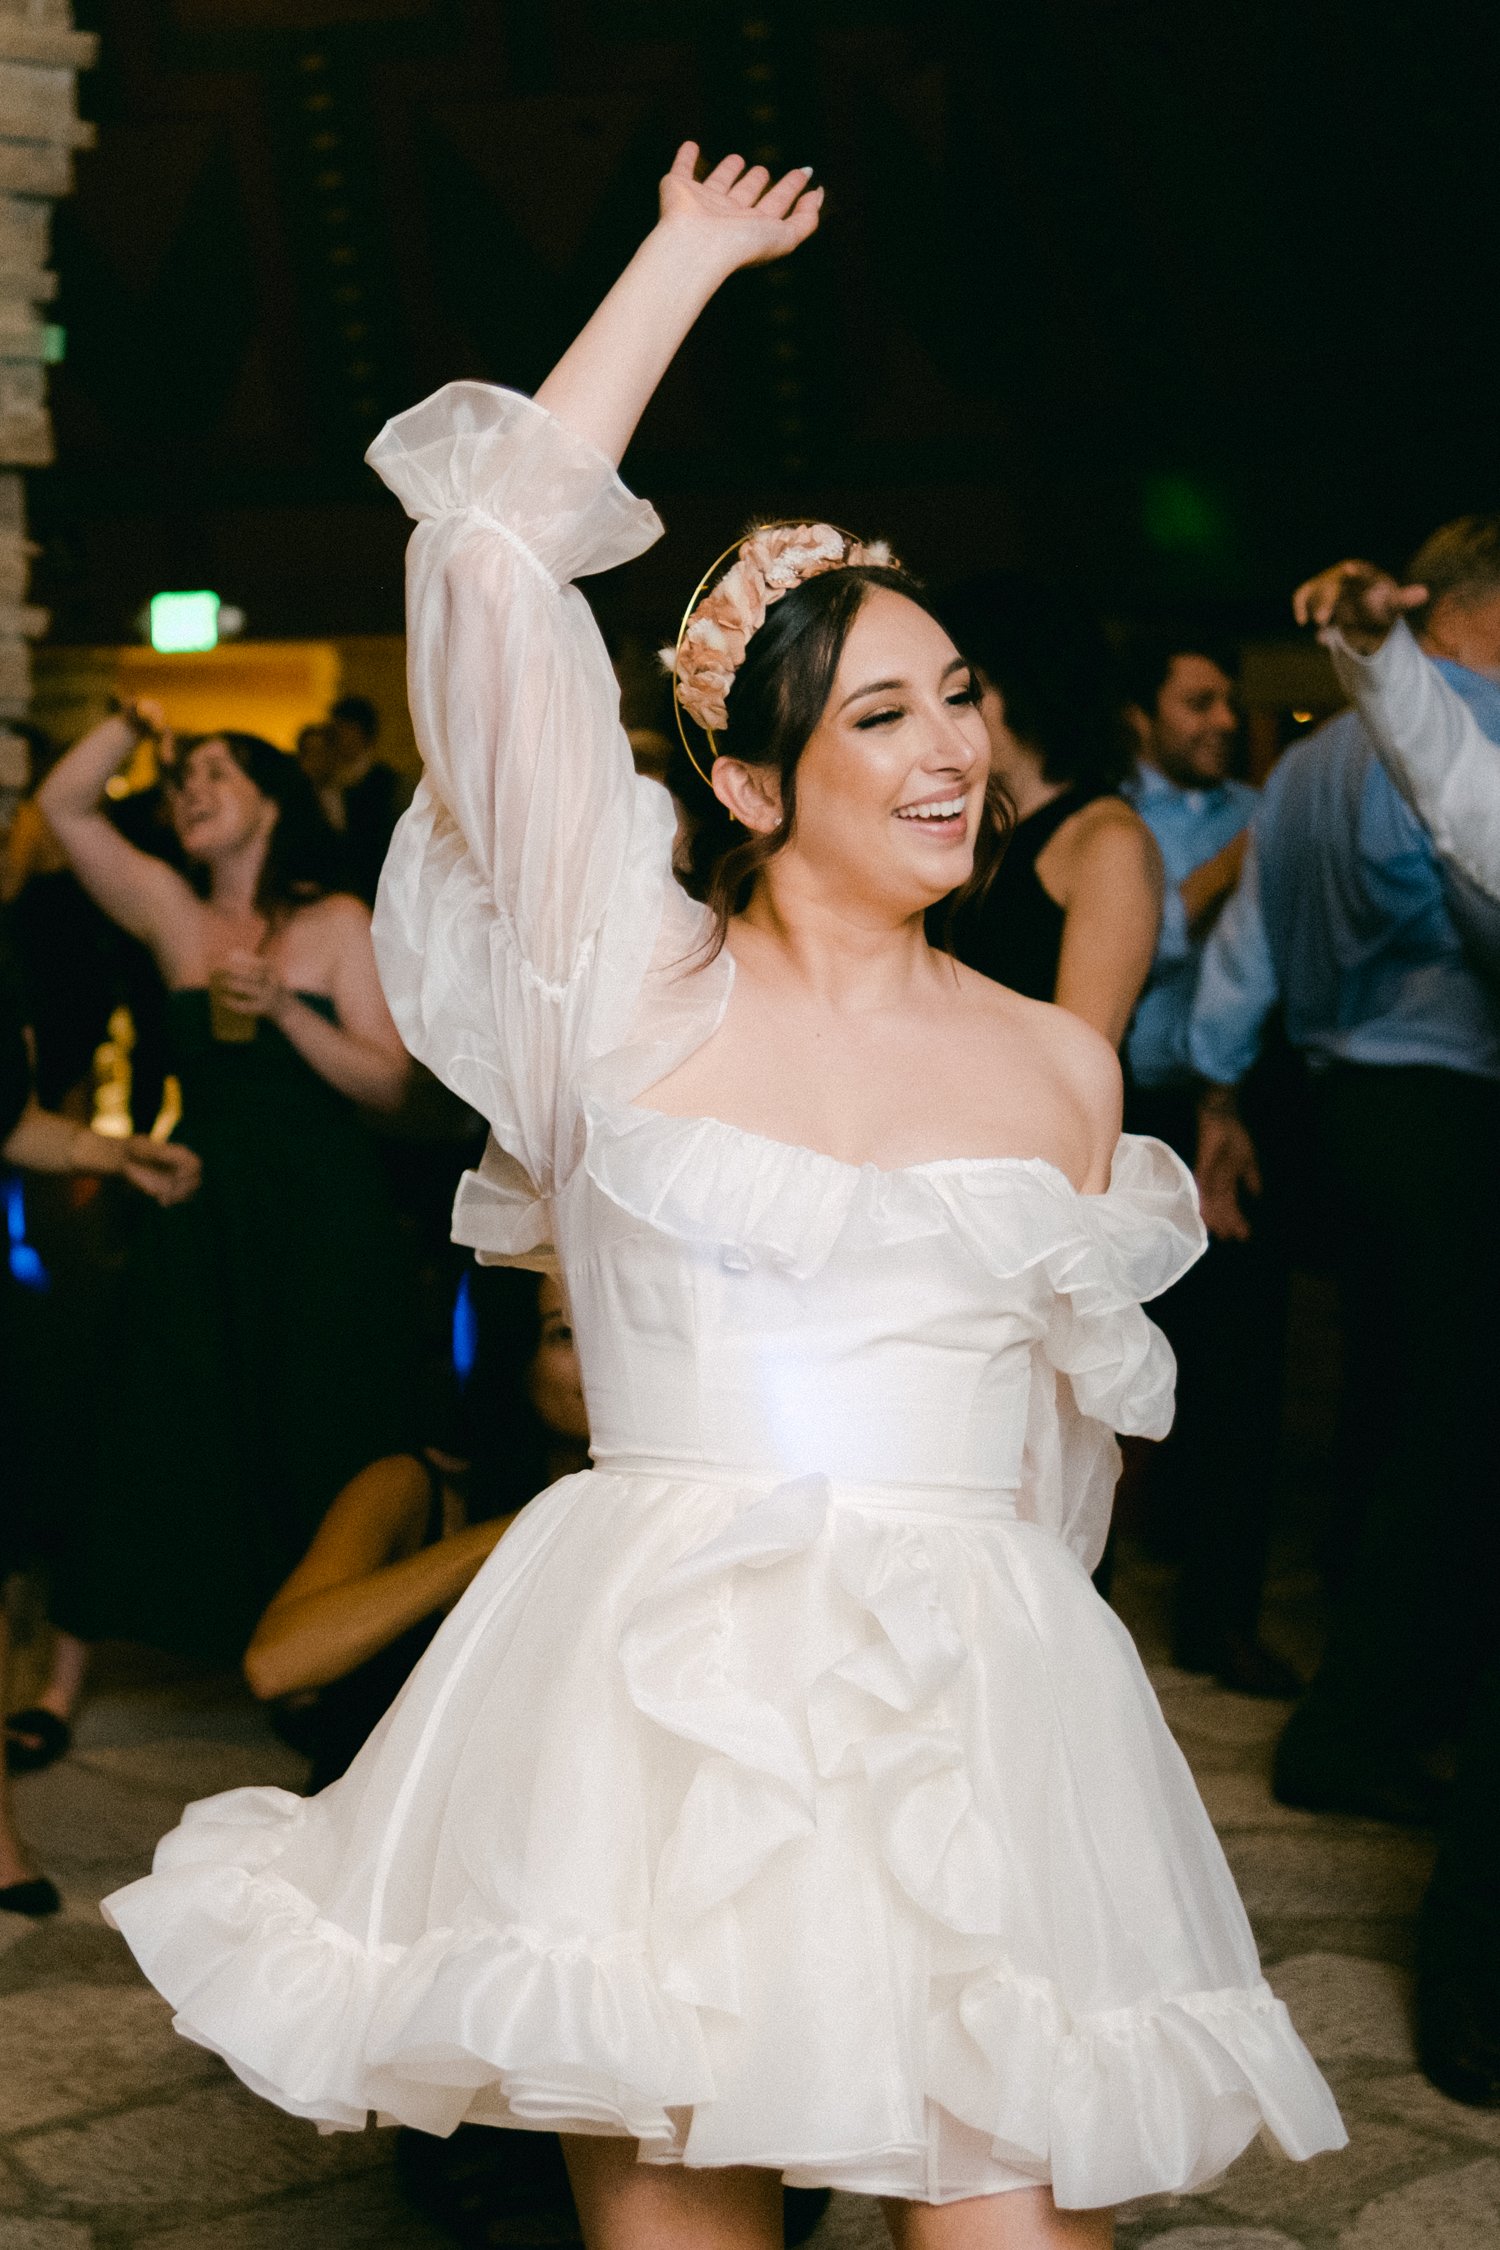 Nakoma Wedding photography, photo of bride dancing after an outfit change